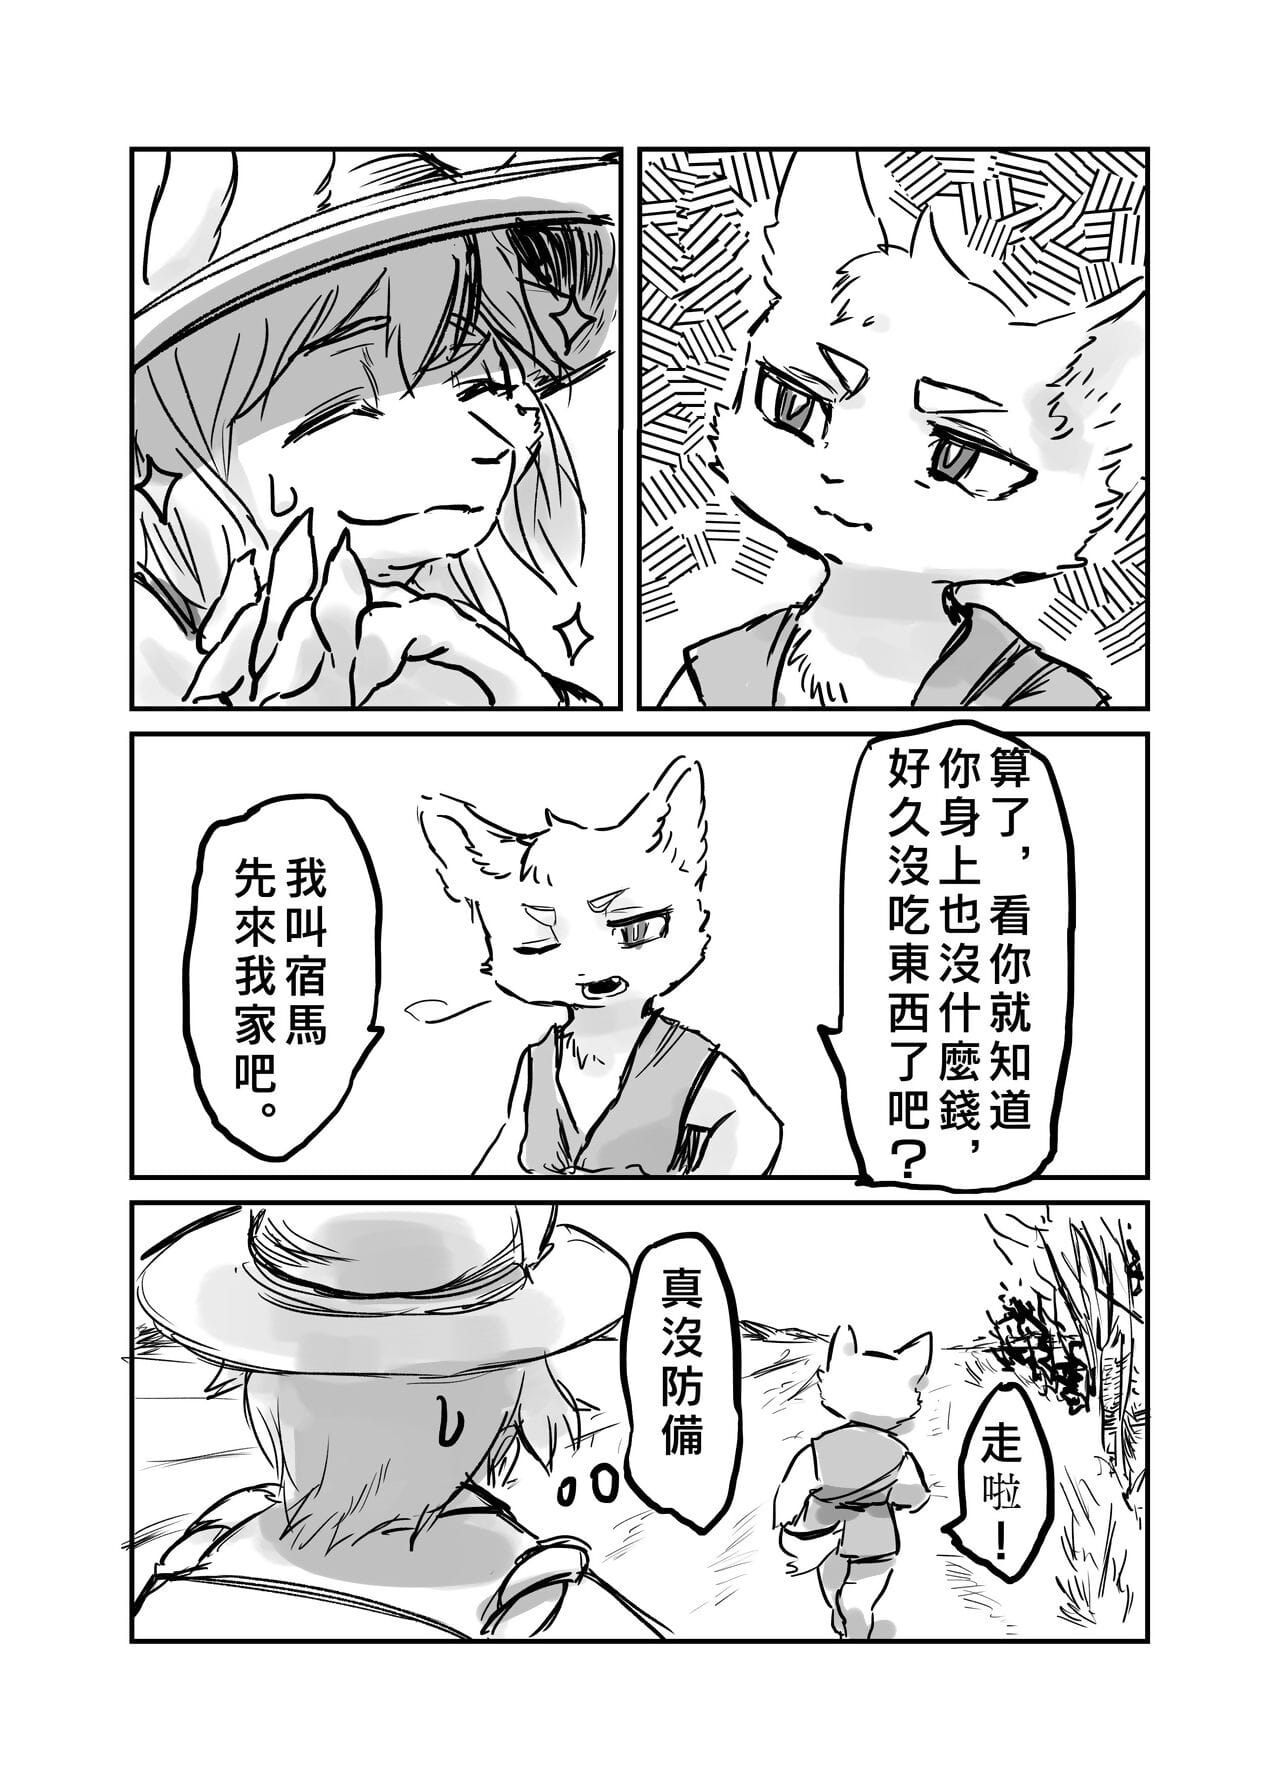 （the visitatore 他乡之人 by：鬼流 page 1